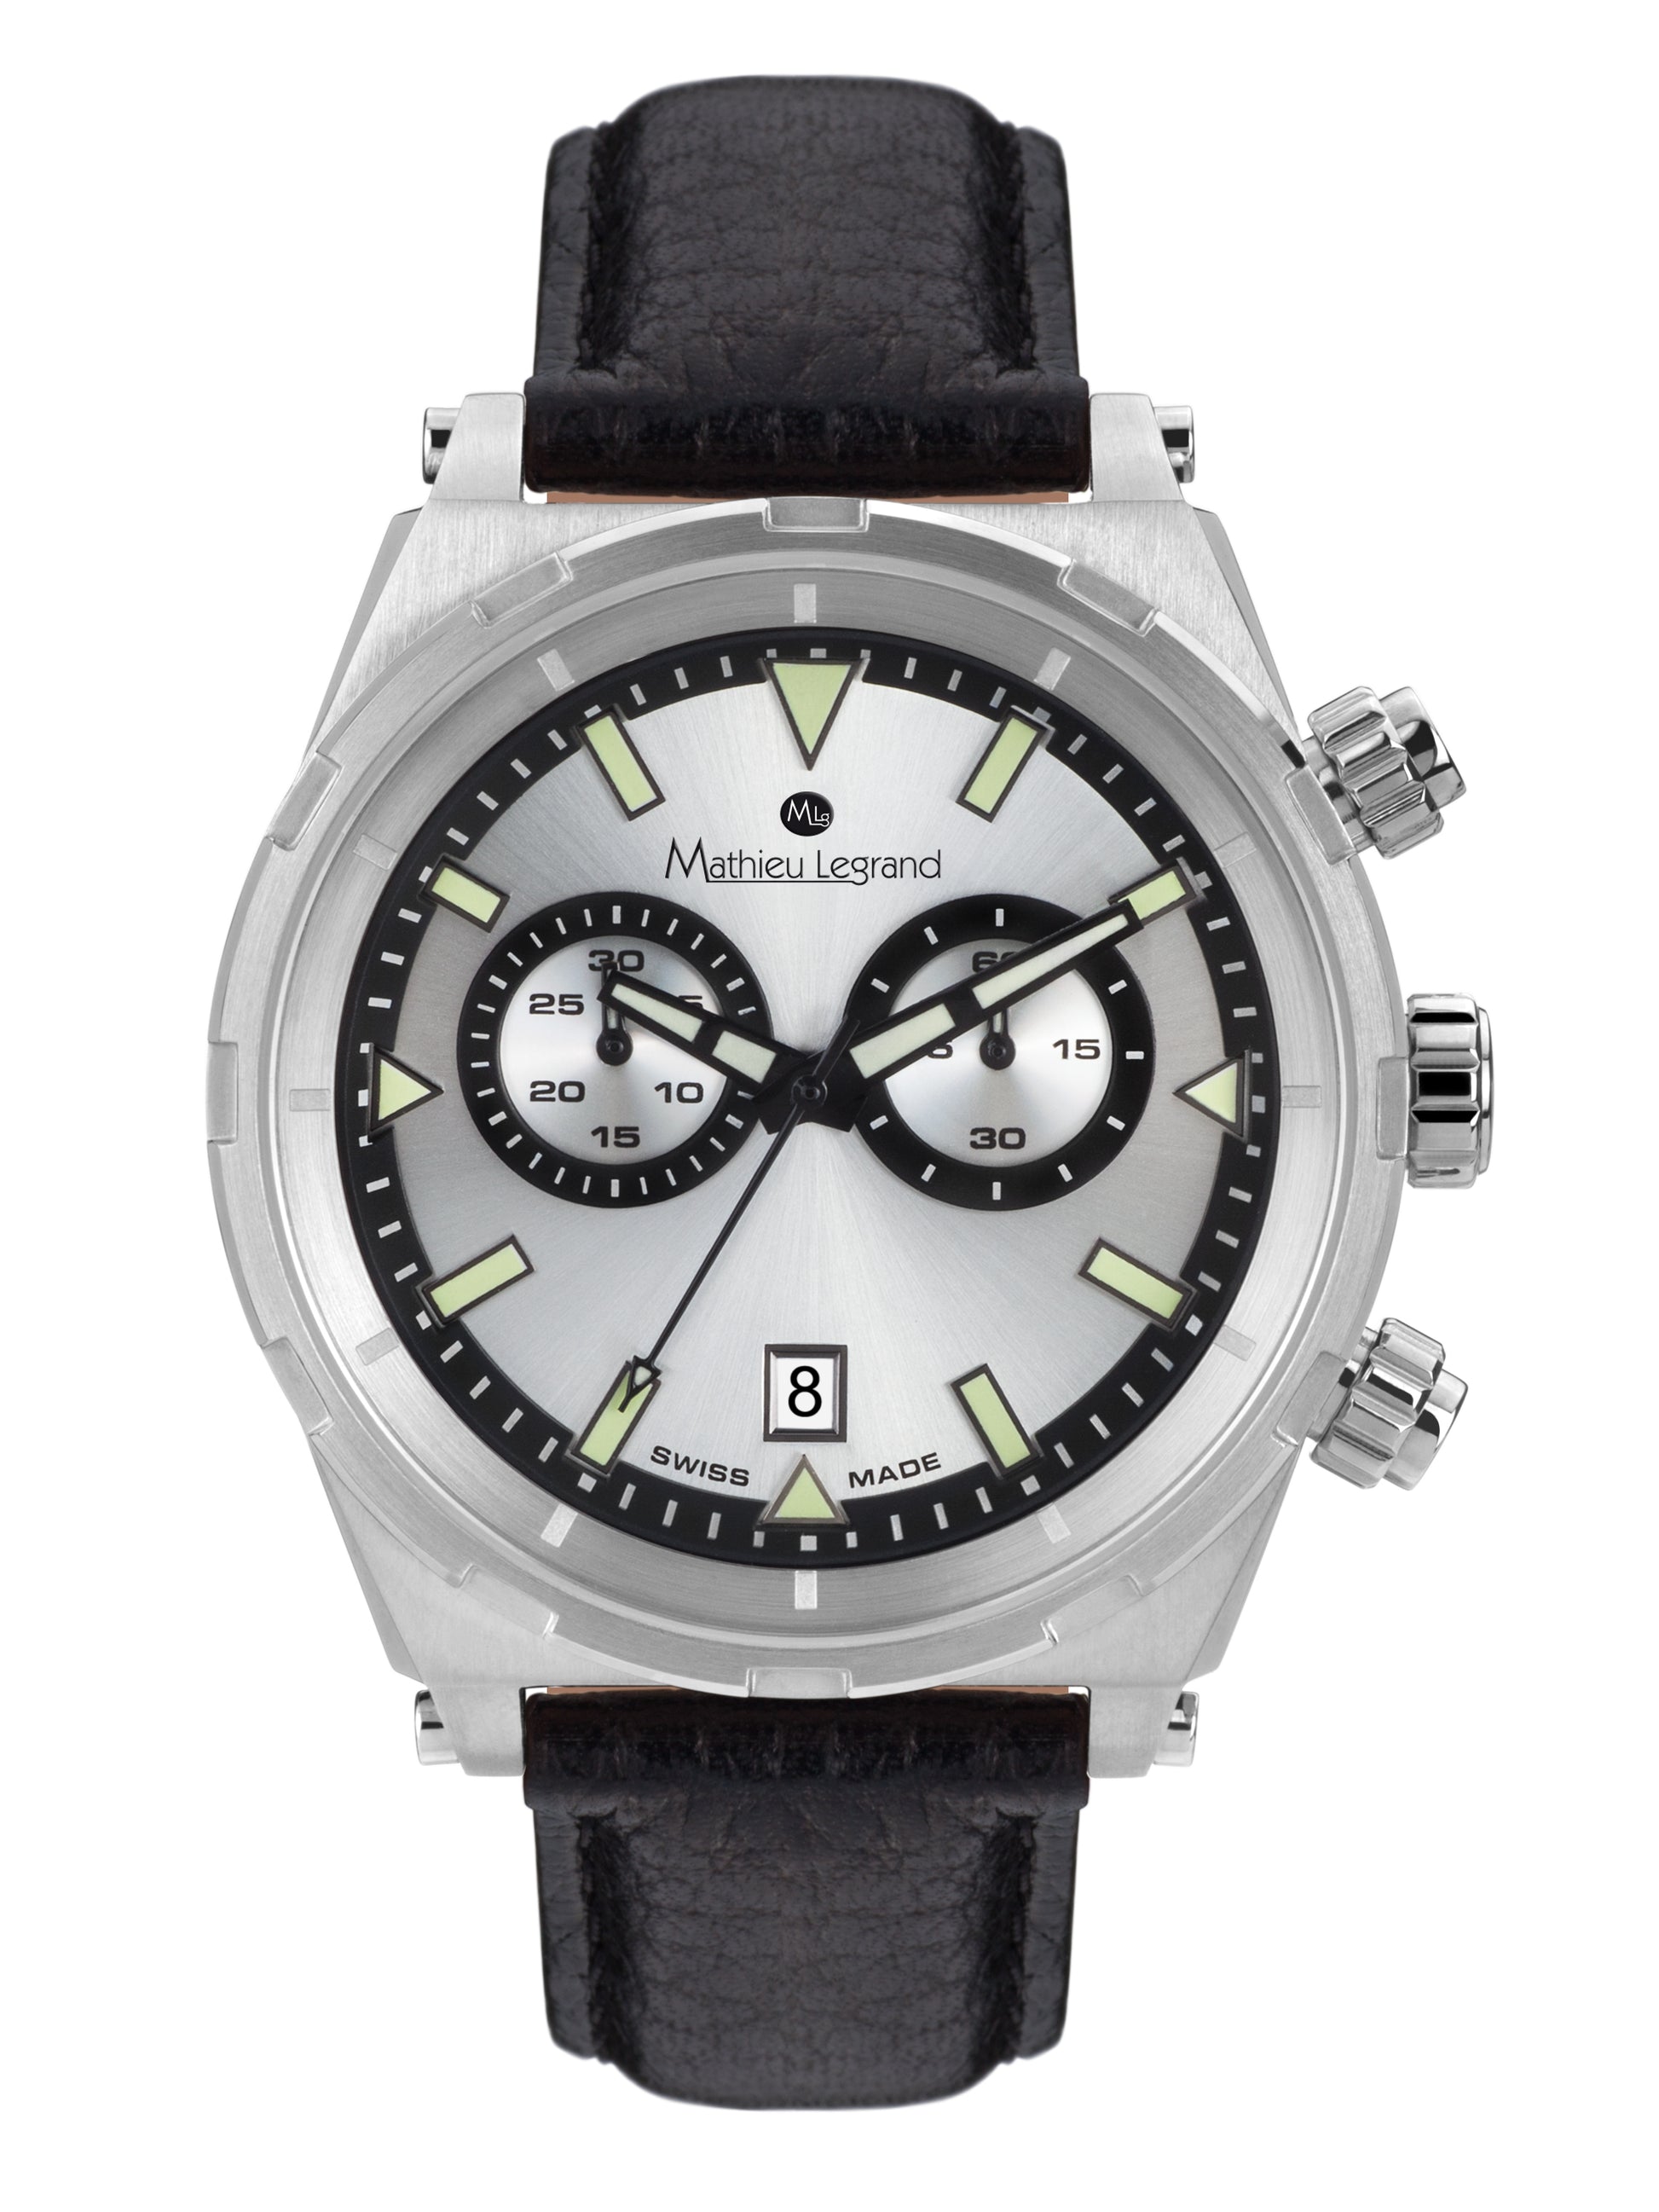 Automatic watches — Master — Mathieu Legrand — steel silver leather